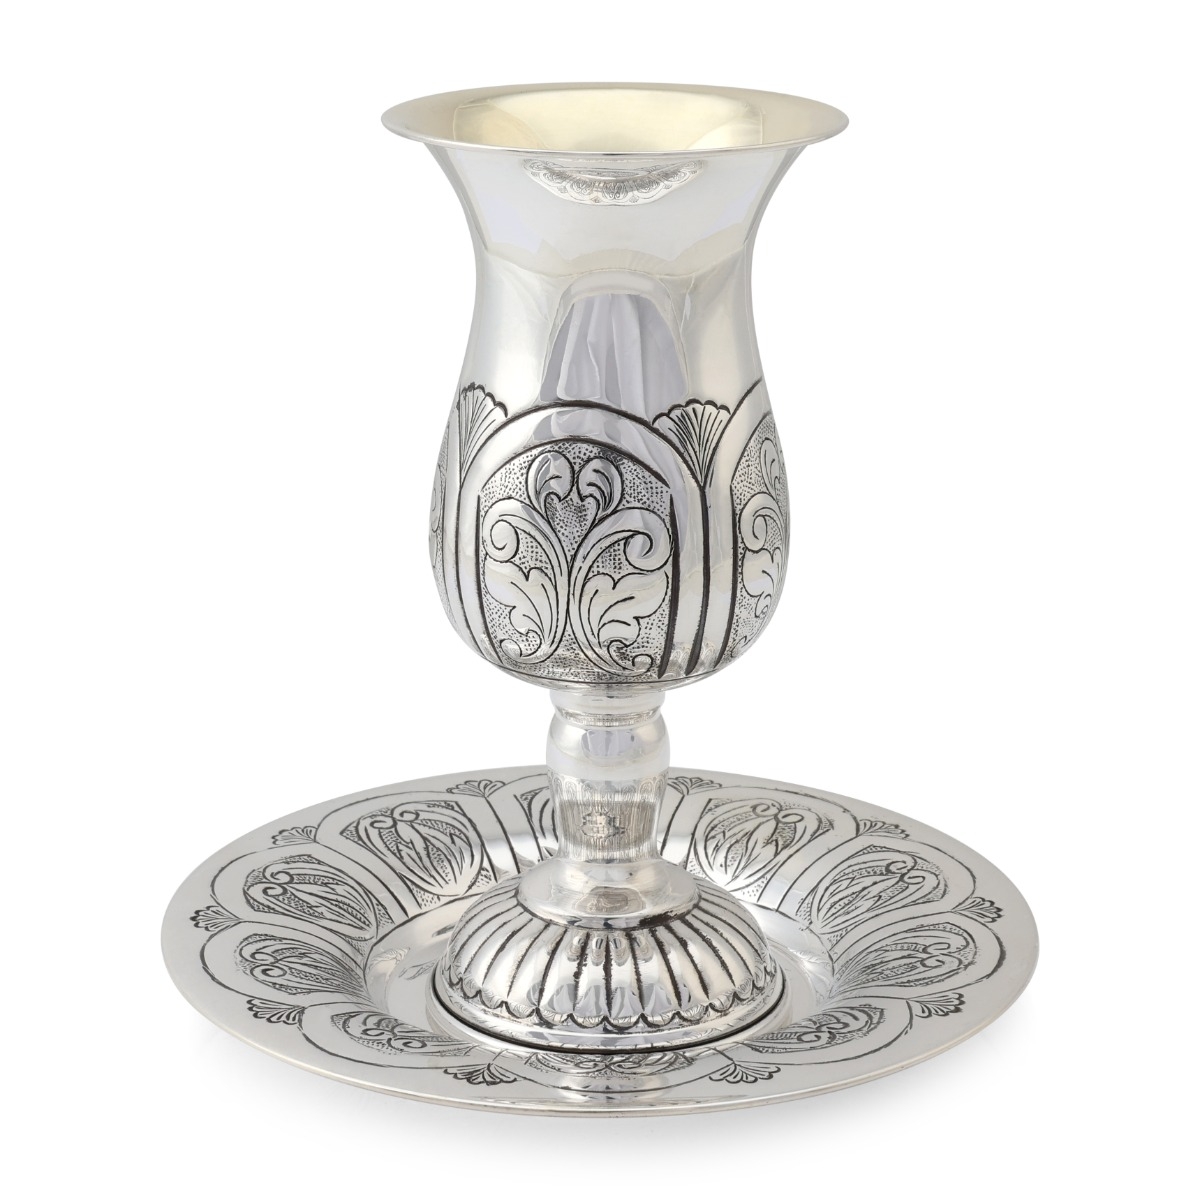 Luxurious 925 Sterling Silver Plated Kiddush Cup Set - Foliate Chasing - 1